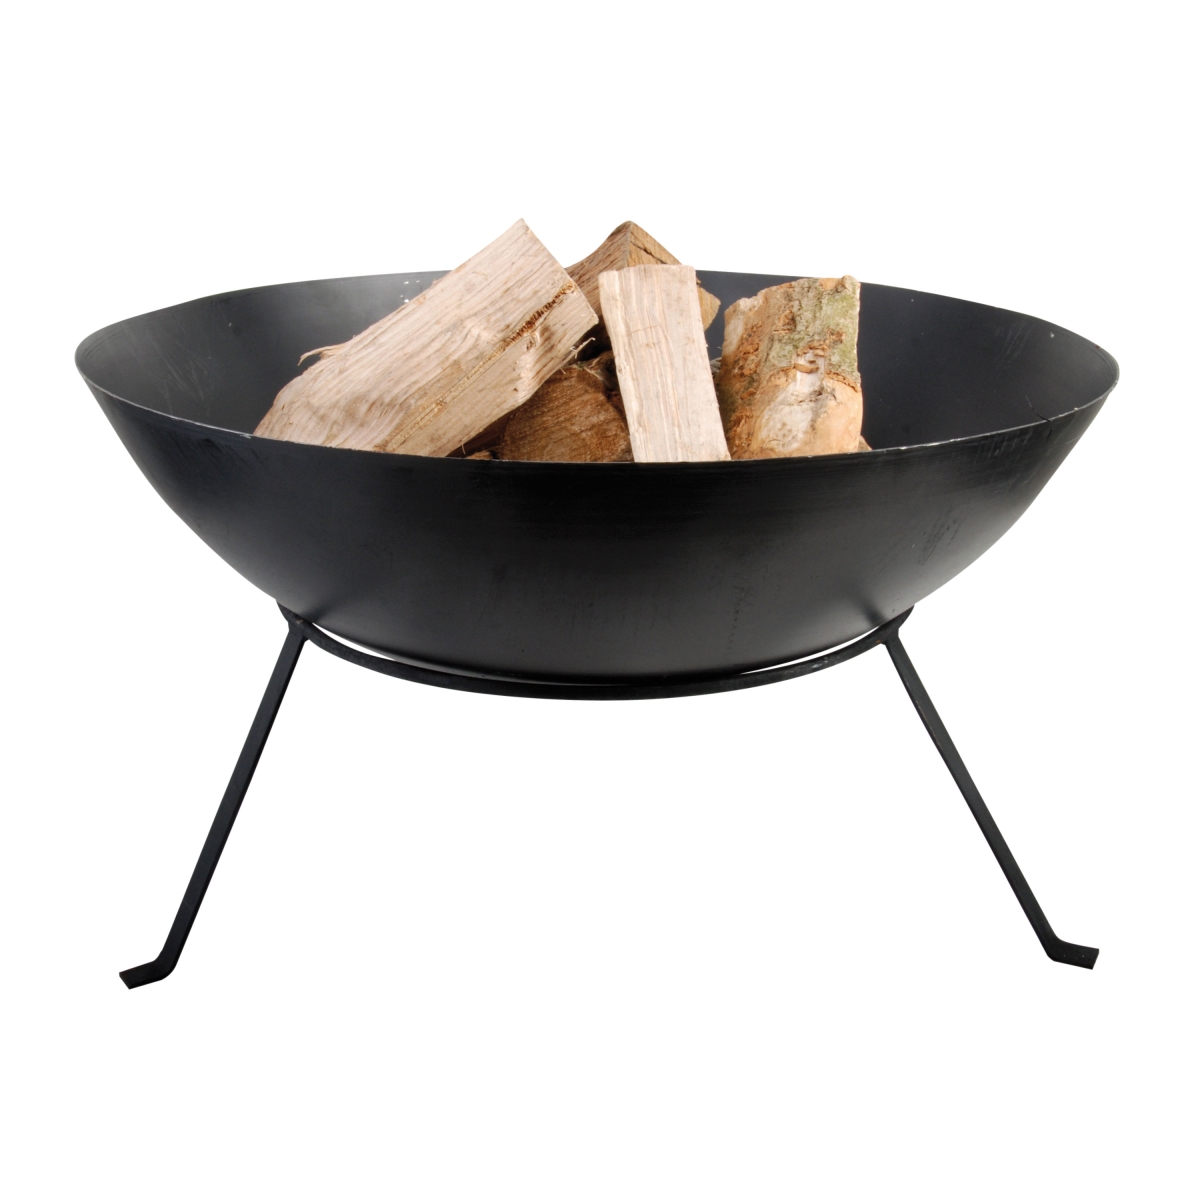 Ff114 Metal Fire Bowl With Legs, Black - Large